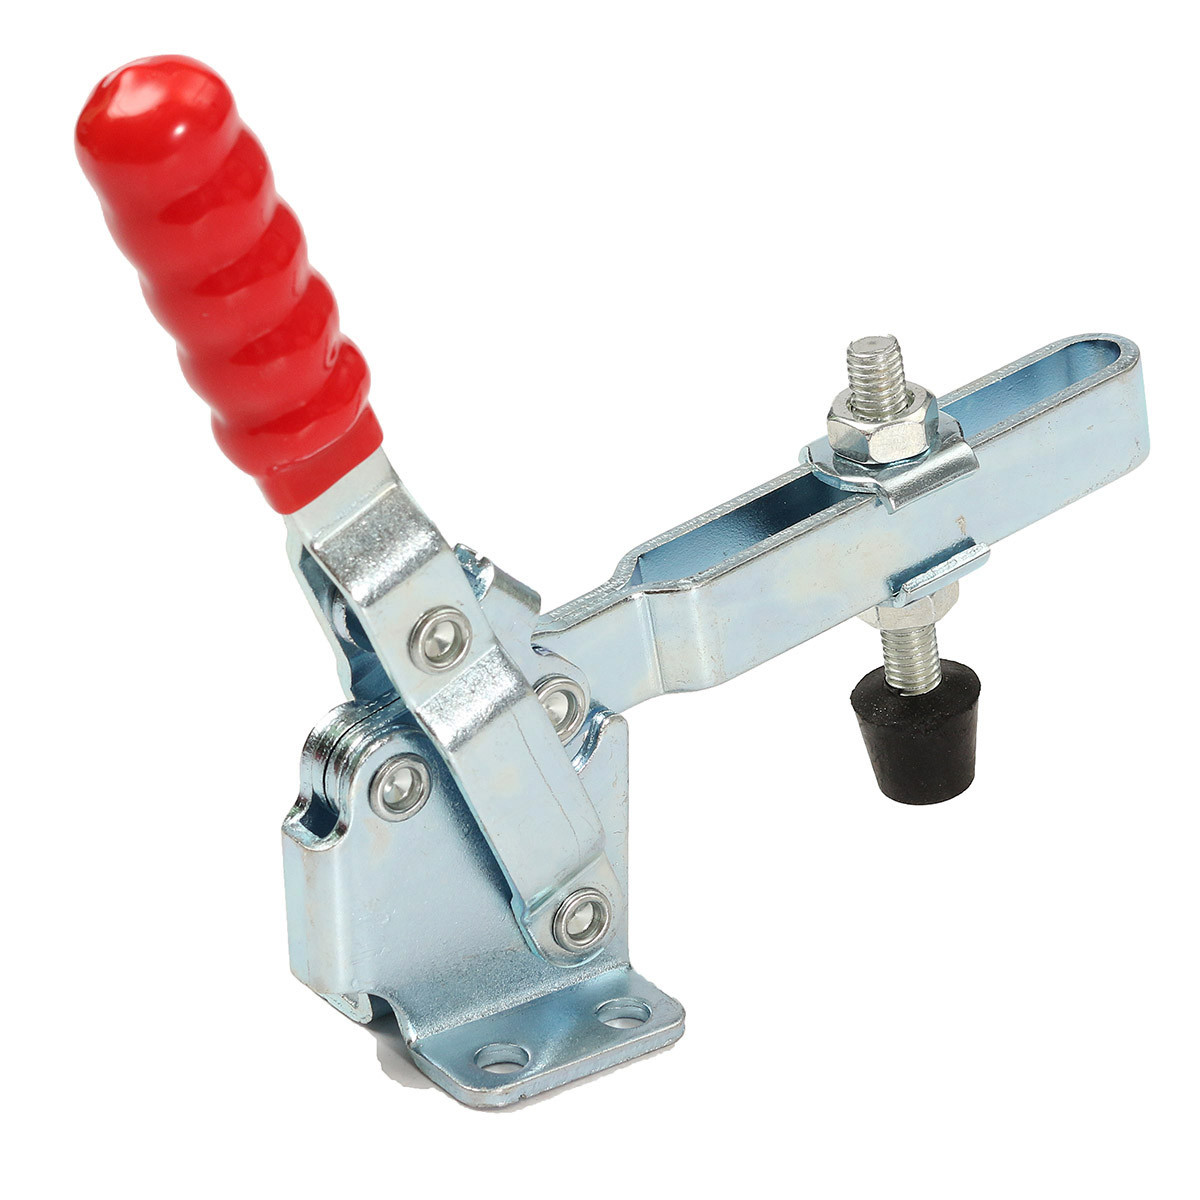 227KG-Holding-Capacity-Quick-Release-U-Bar-Hand-Tool-Vertical-Type-Toggle-Clamp-1103853-2